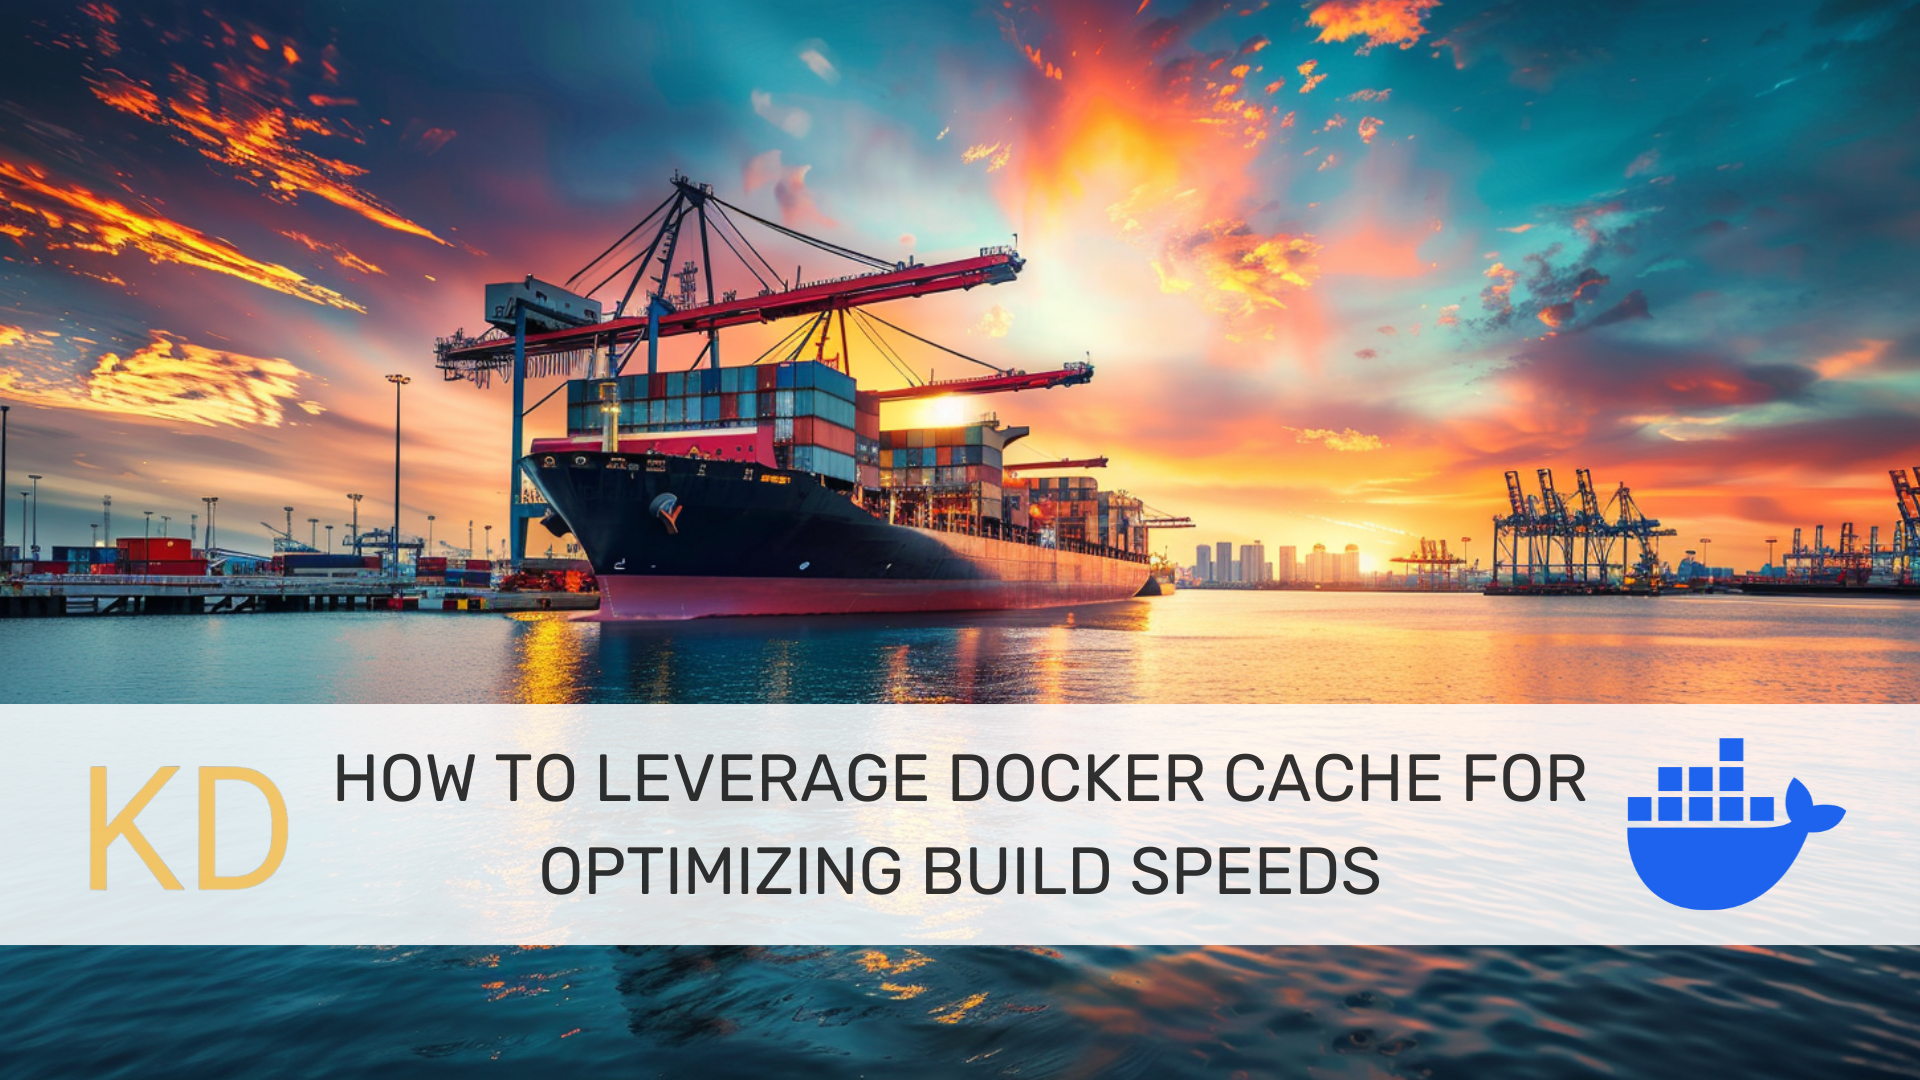 How To Leverage Docker Cache for Optimizing Construct Speeds